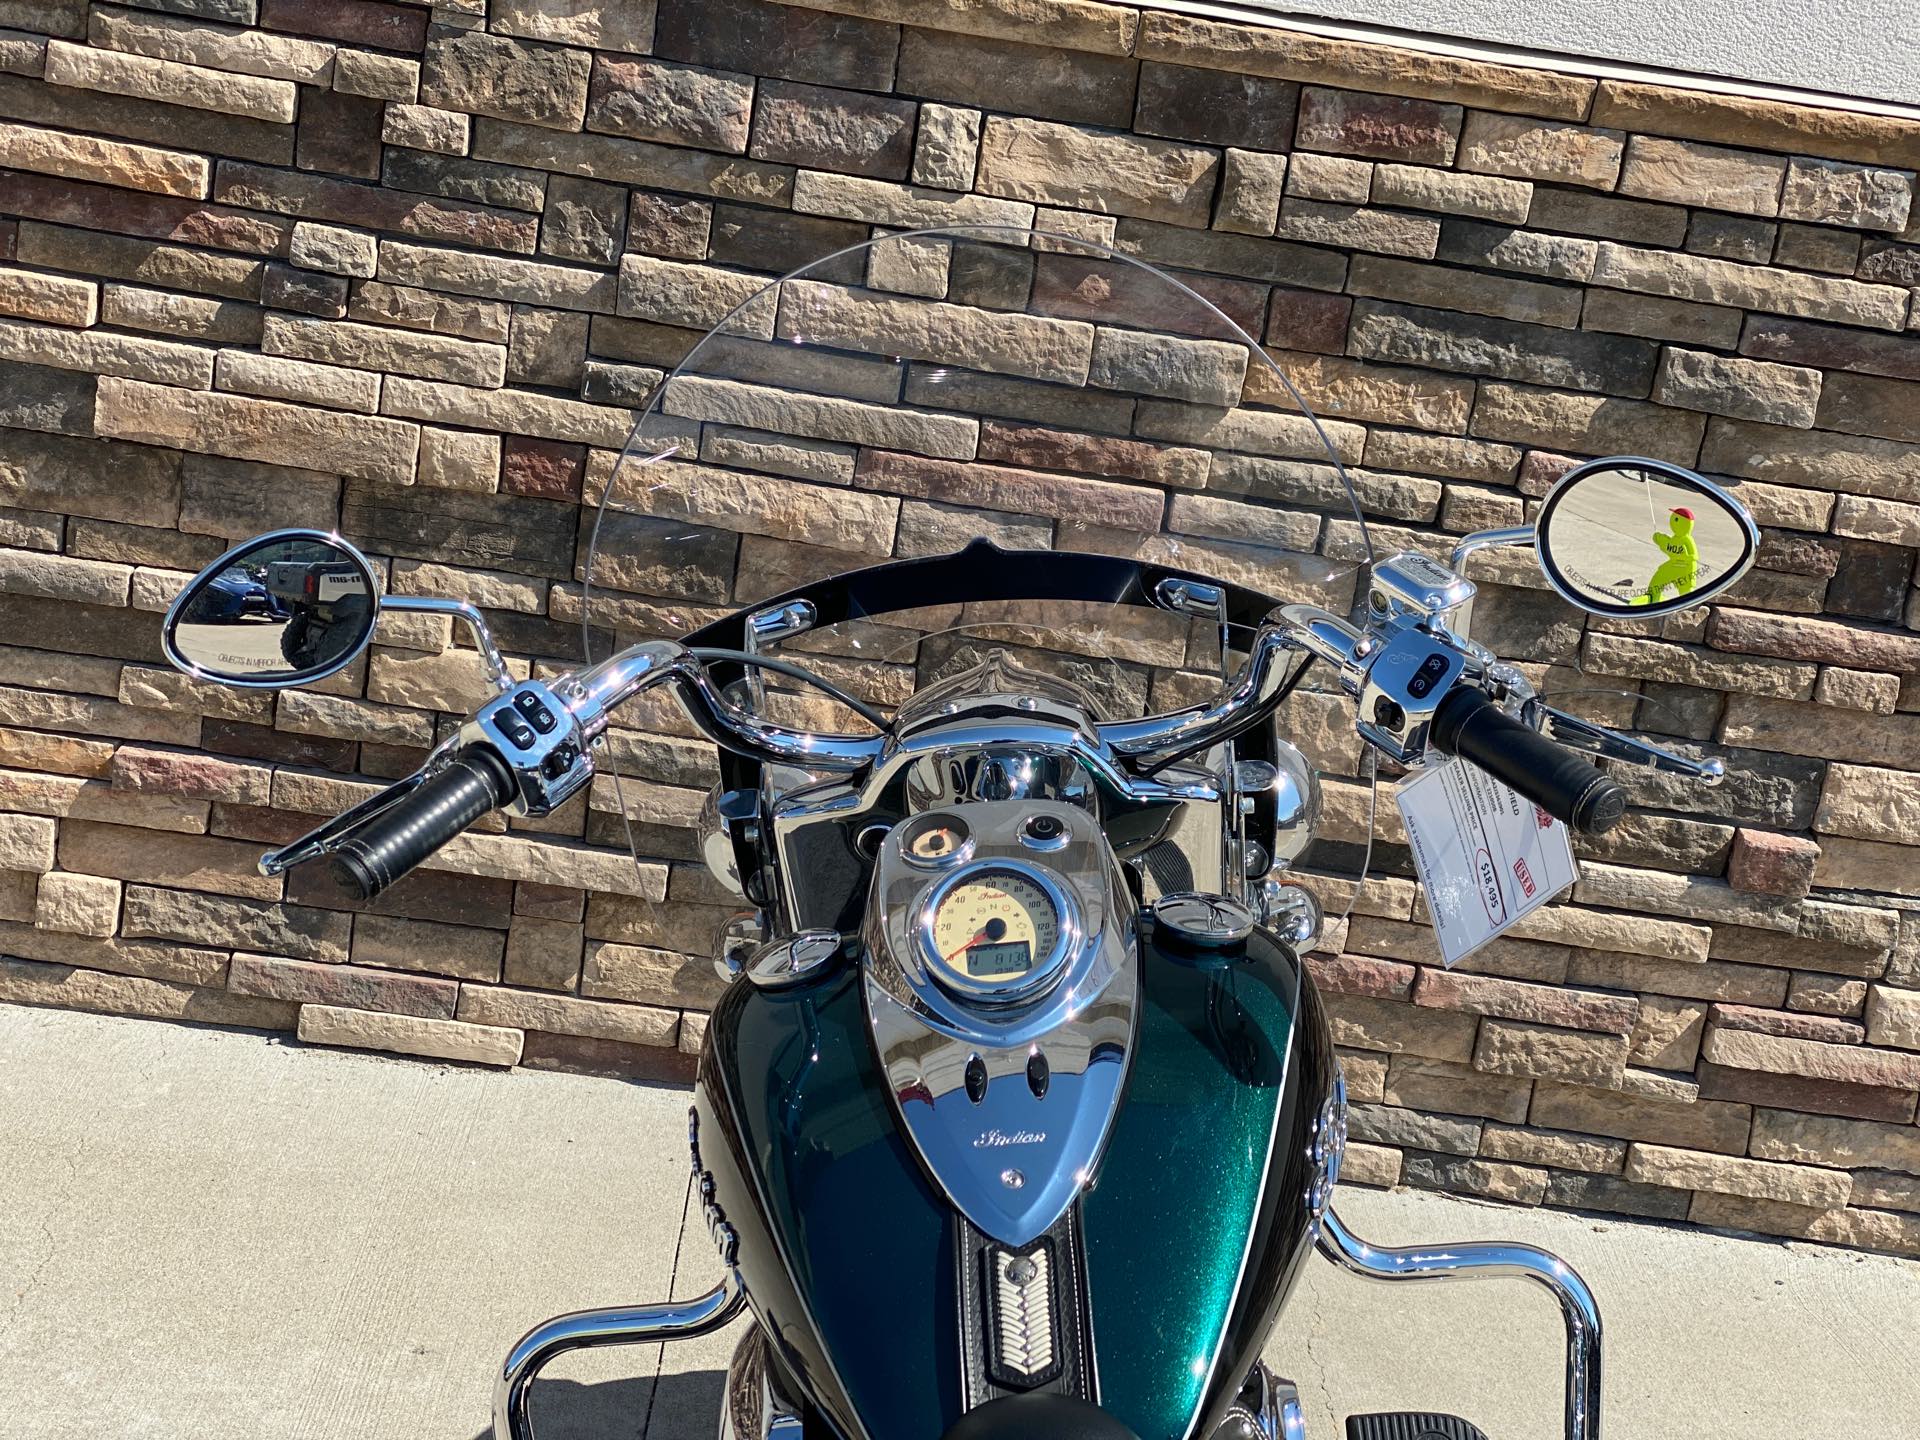 2018 Indian Springfield Base at Head Indian Motorcycle